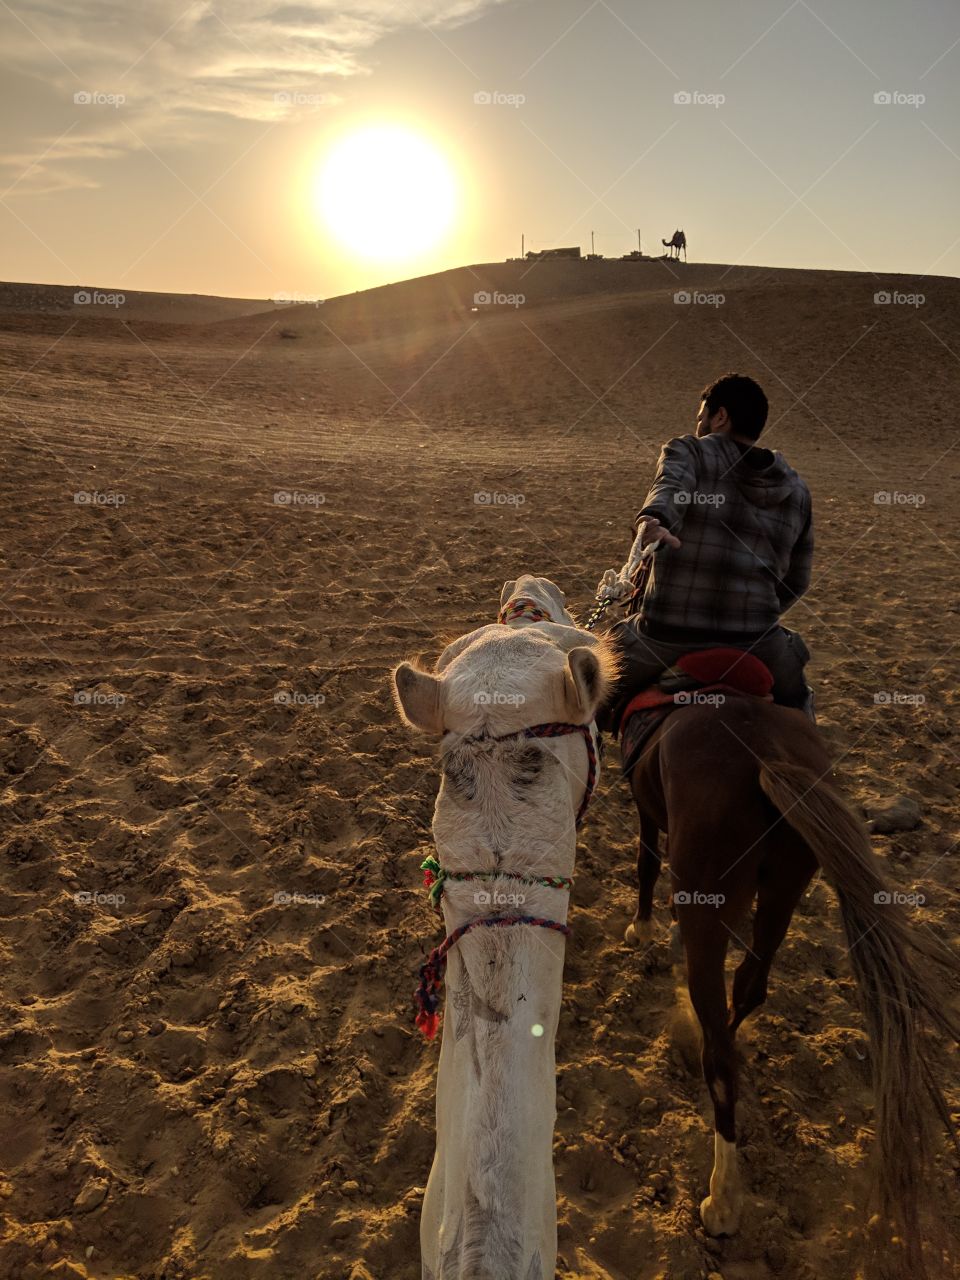 being lead into the desert on a camel in Cairo, Egypt